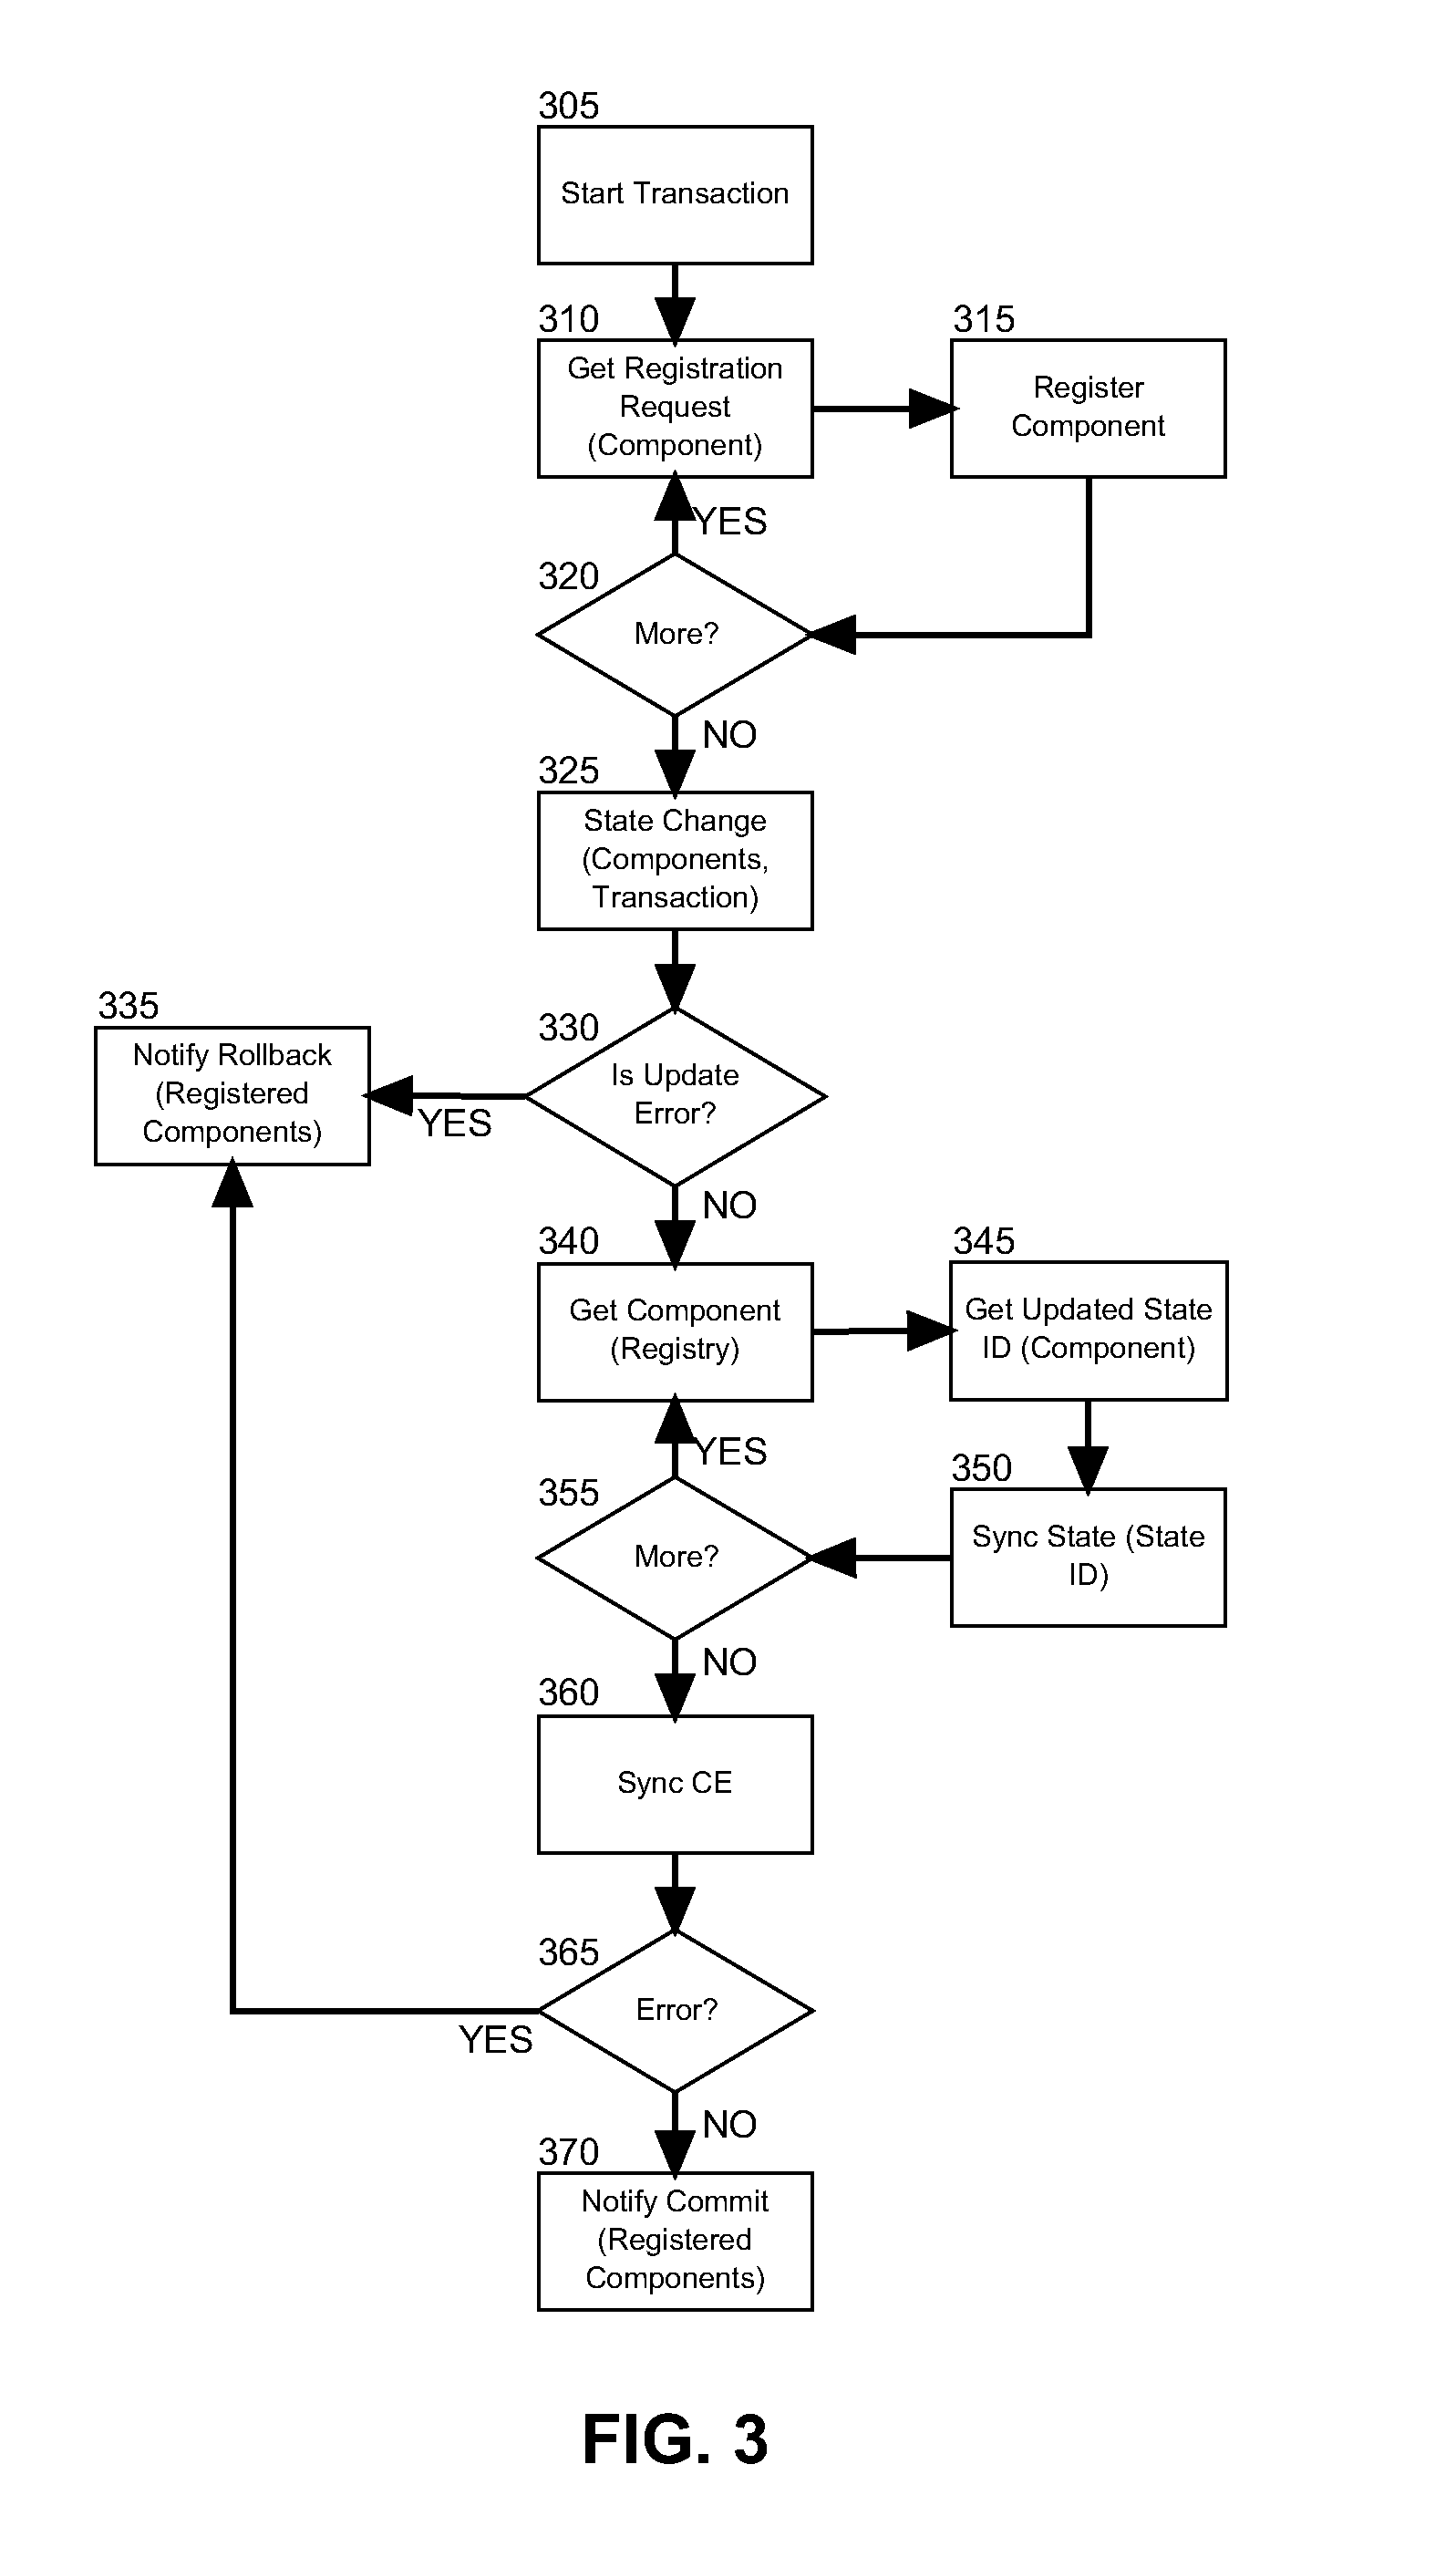 Managing data consistency between loosely coupled components in a distributed computing system